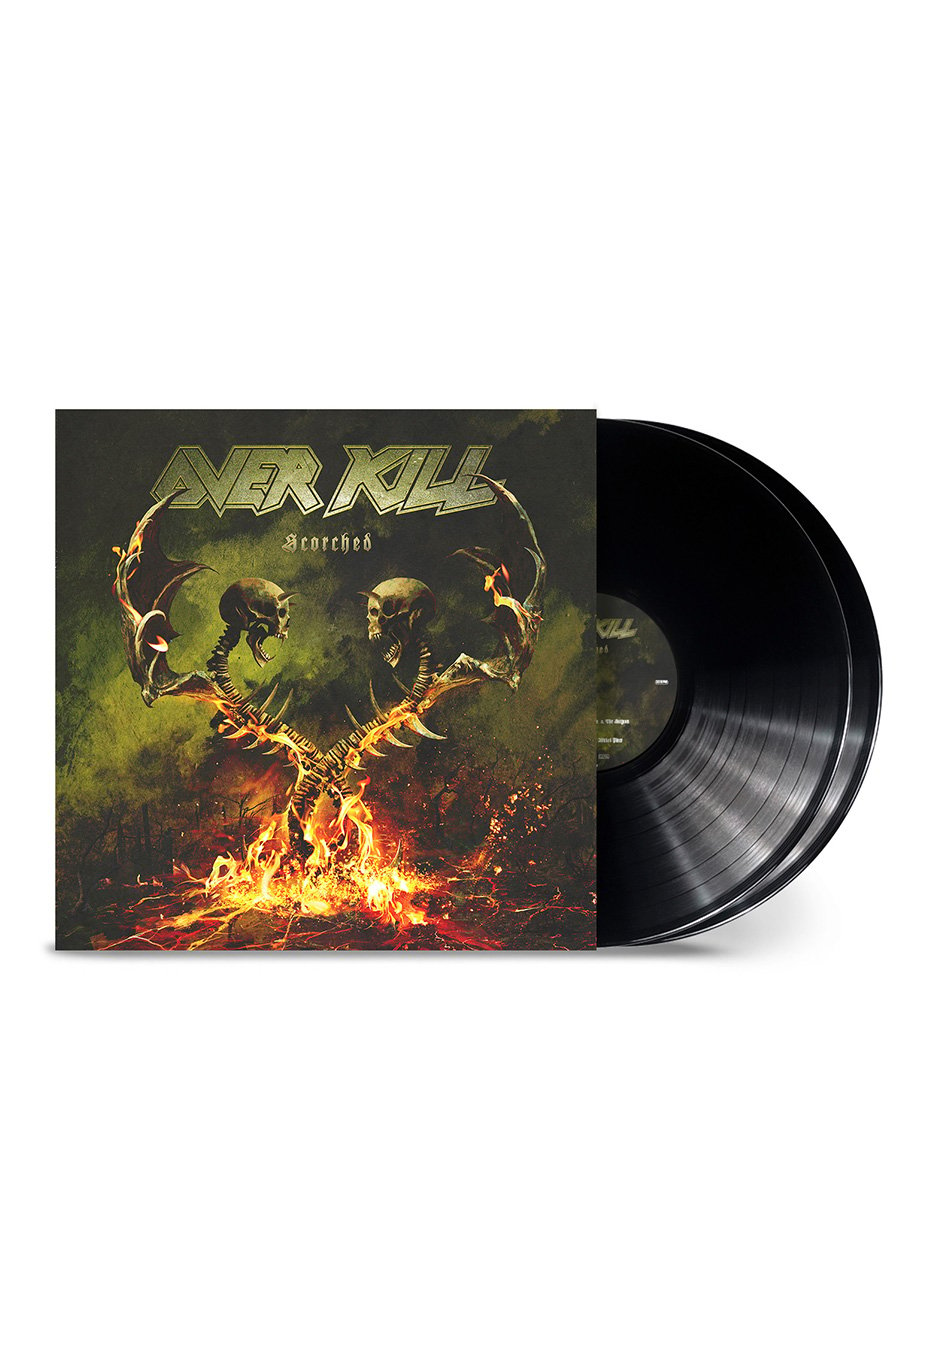 Overkill - Scorched - 2 Vinyl